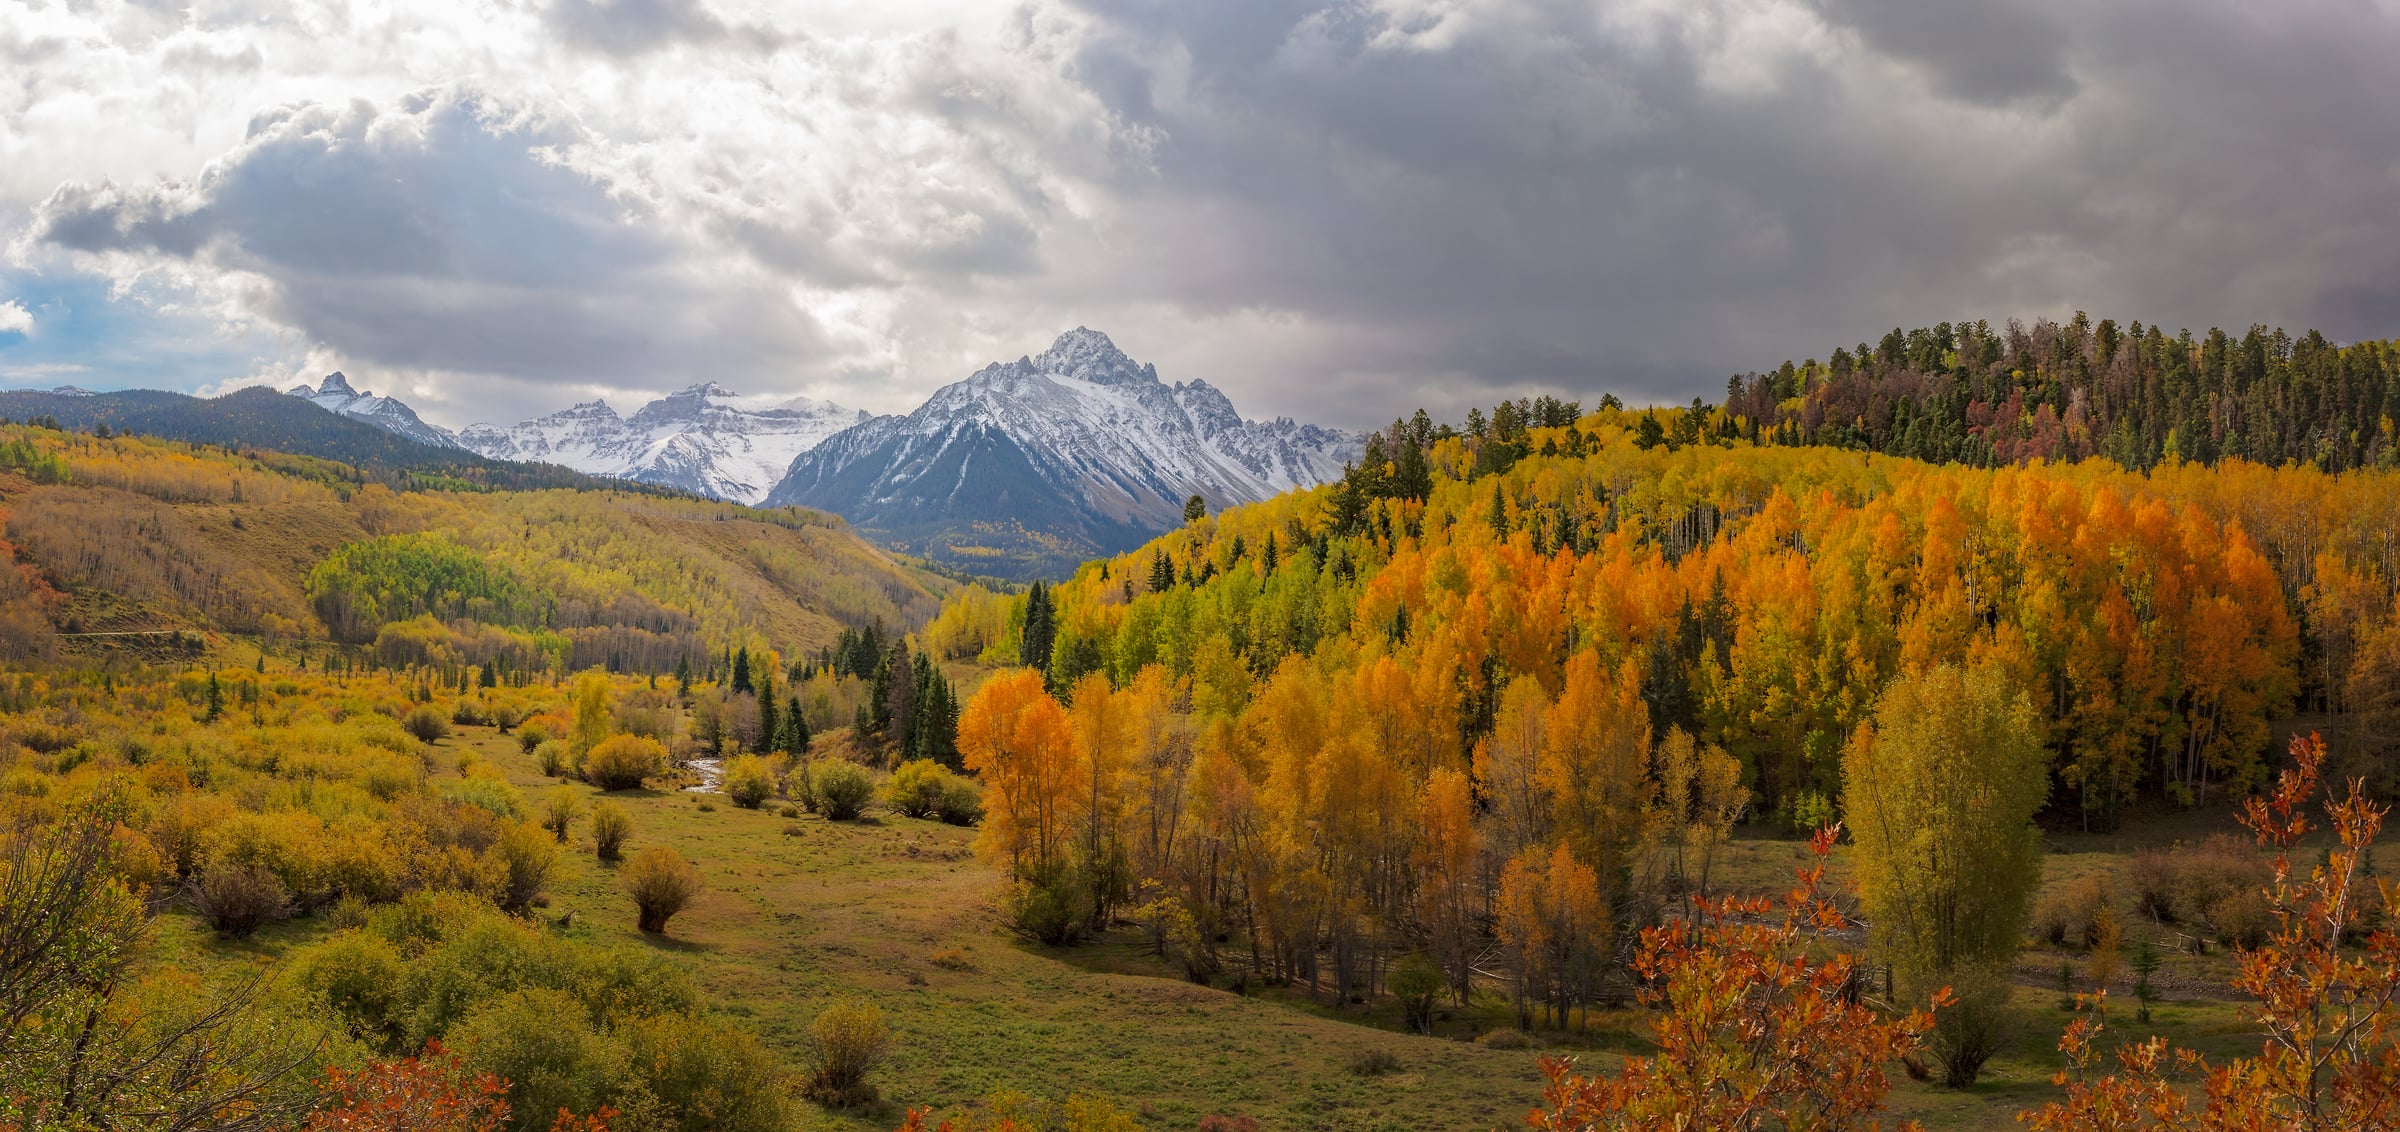 146 megapixels! A very high resolution, large-format VAST photo print of the San Juan mountains in Colorado with autumn foliage on trees in the foreground; landscape photograph created by John Freeman in San Juan Mountains, Colorado.